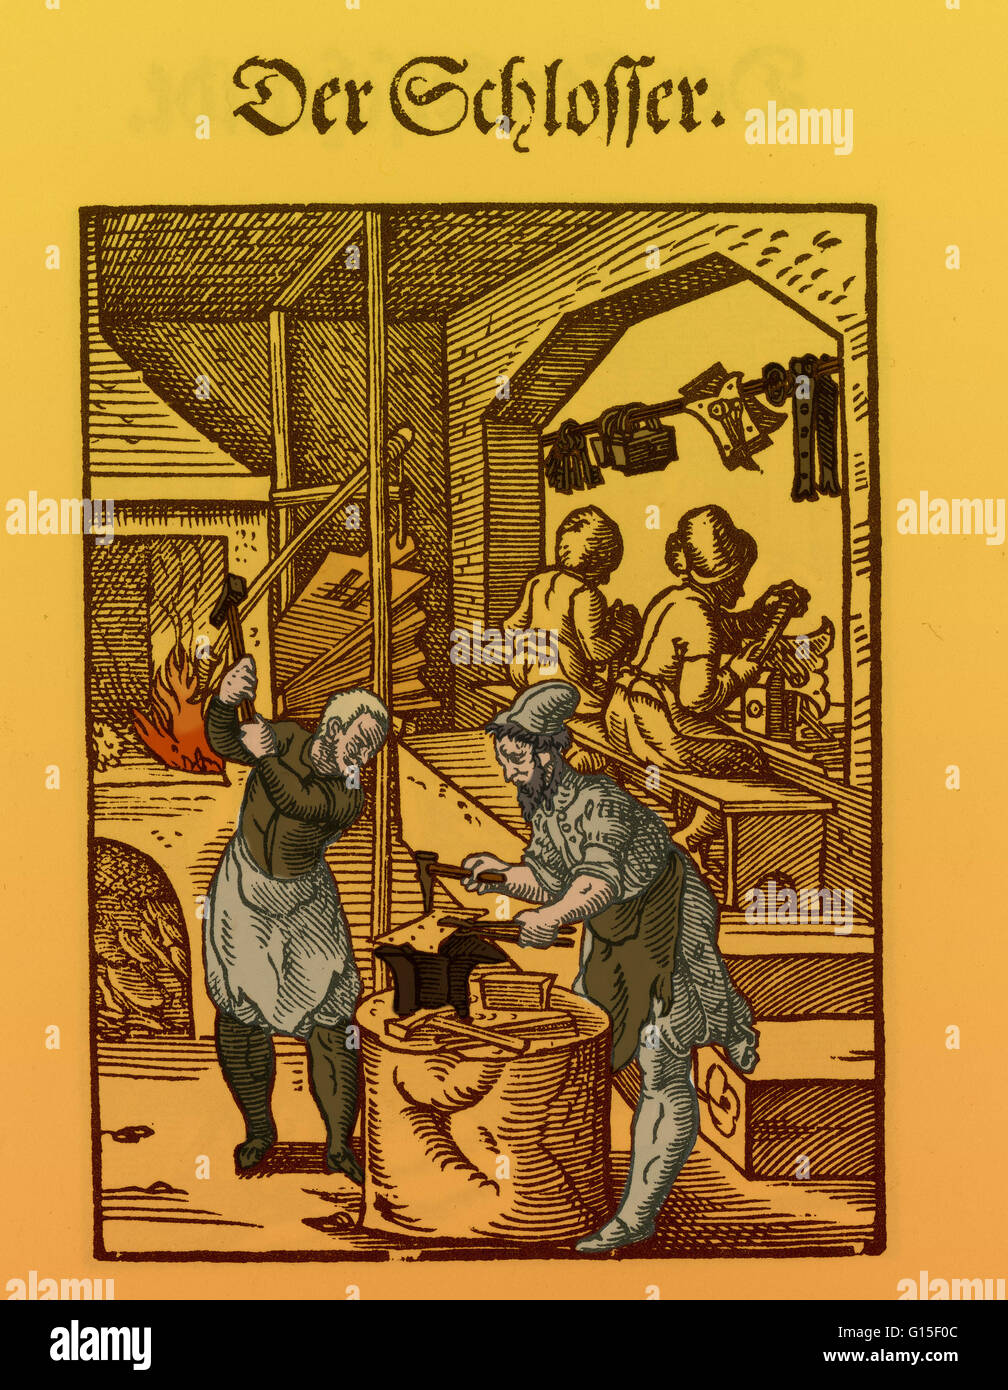 The Locksmith. Woodcut reproduced from Jost Amman's 'Eygentliche Beschreibung aller Stande auff Erden', or 'Exact Description of all Ranks on Earth'. Frankfurt, 1568. Amman documented contemporary life in the 1500s. His book is known as the Ständebuch (Bo Stock Photo